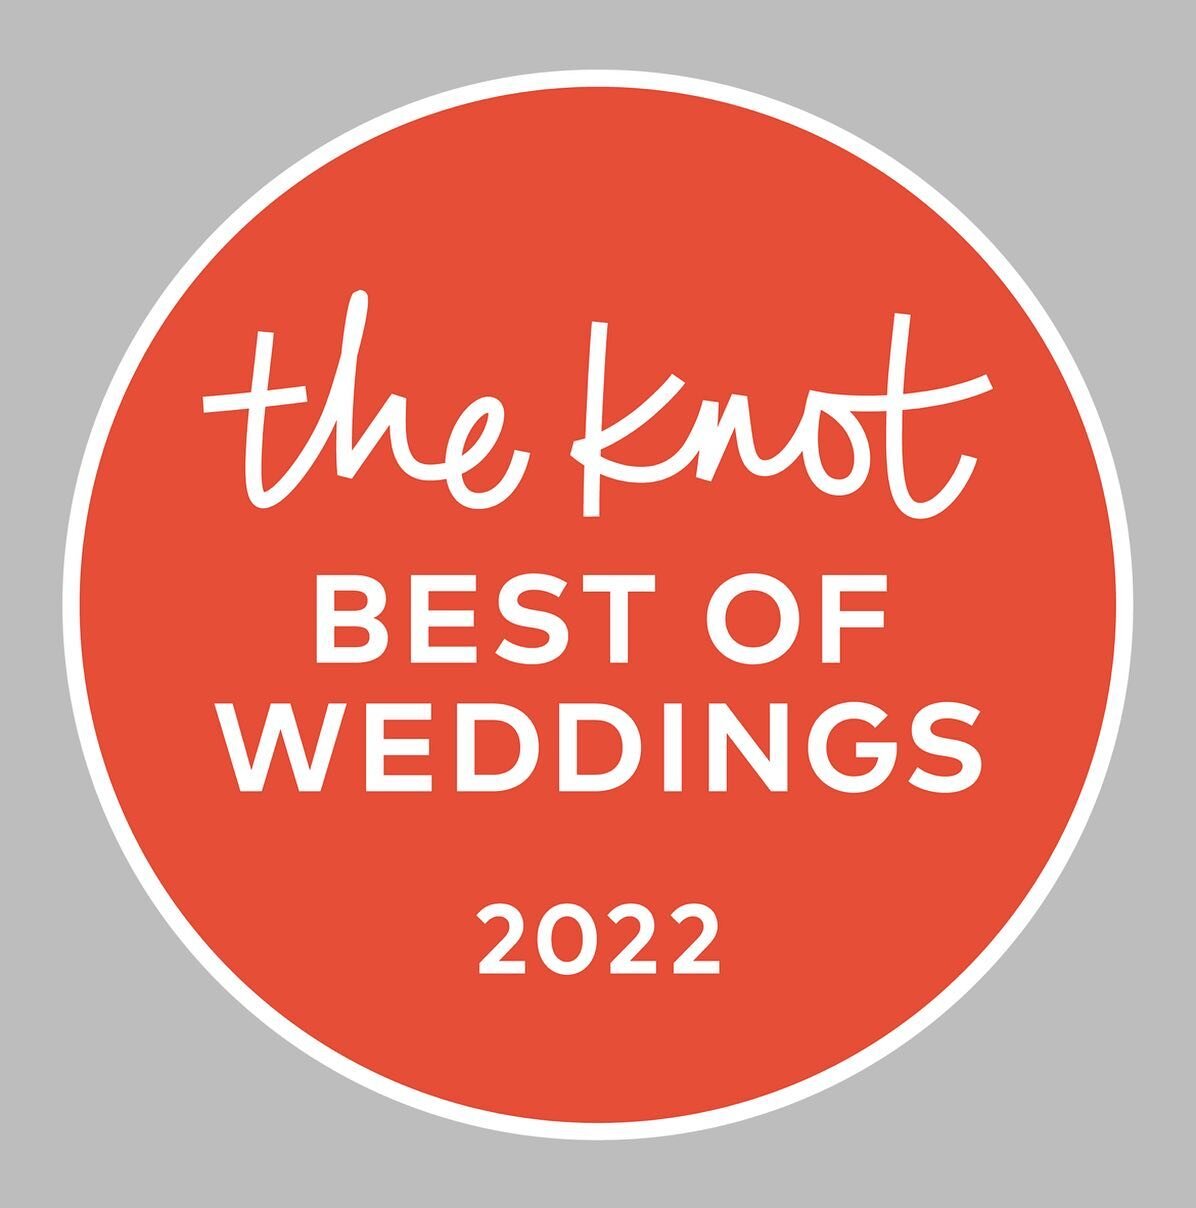 Thanks to @theknot and @weddingwire for the awards in 2022!! And thank you to all of our wonderful clients spreading the word. Happy New Year 🎊